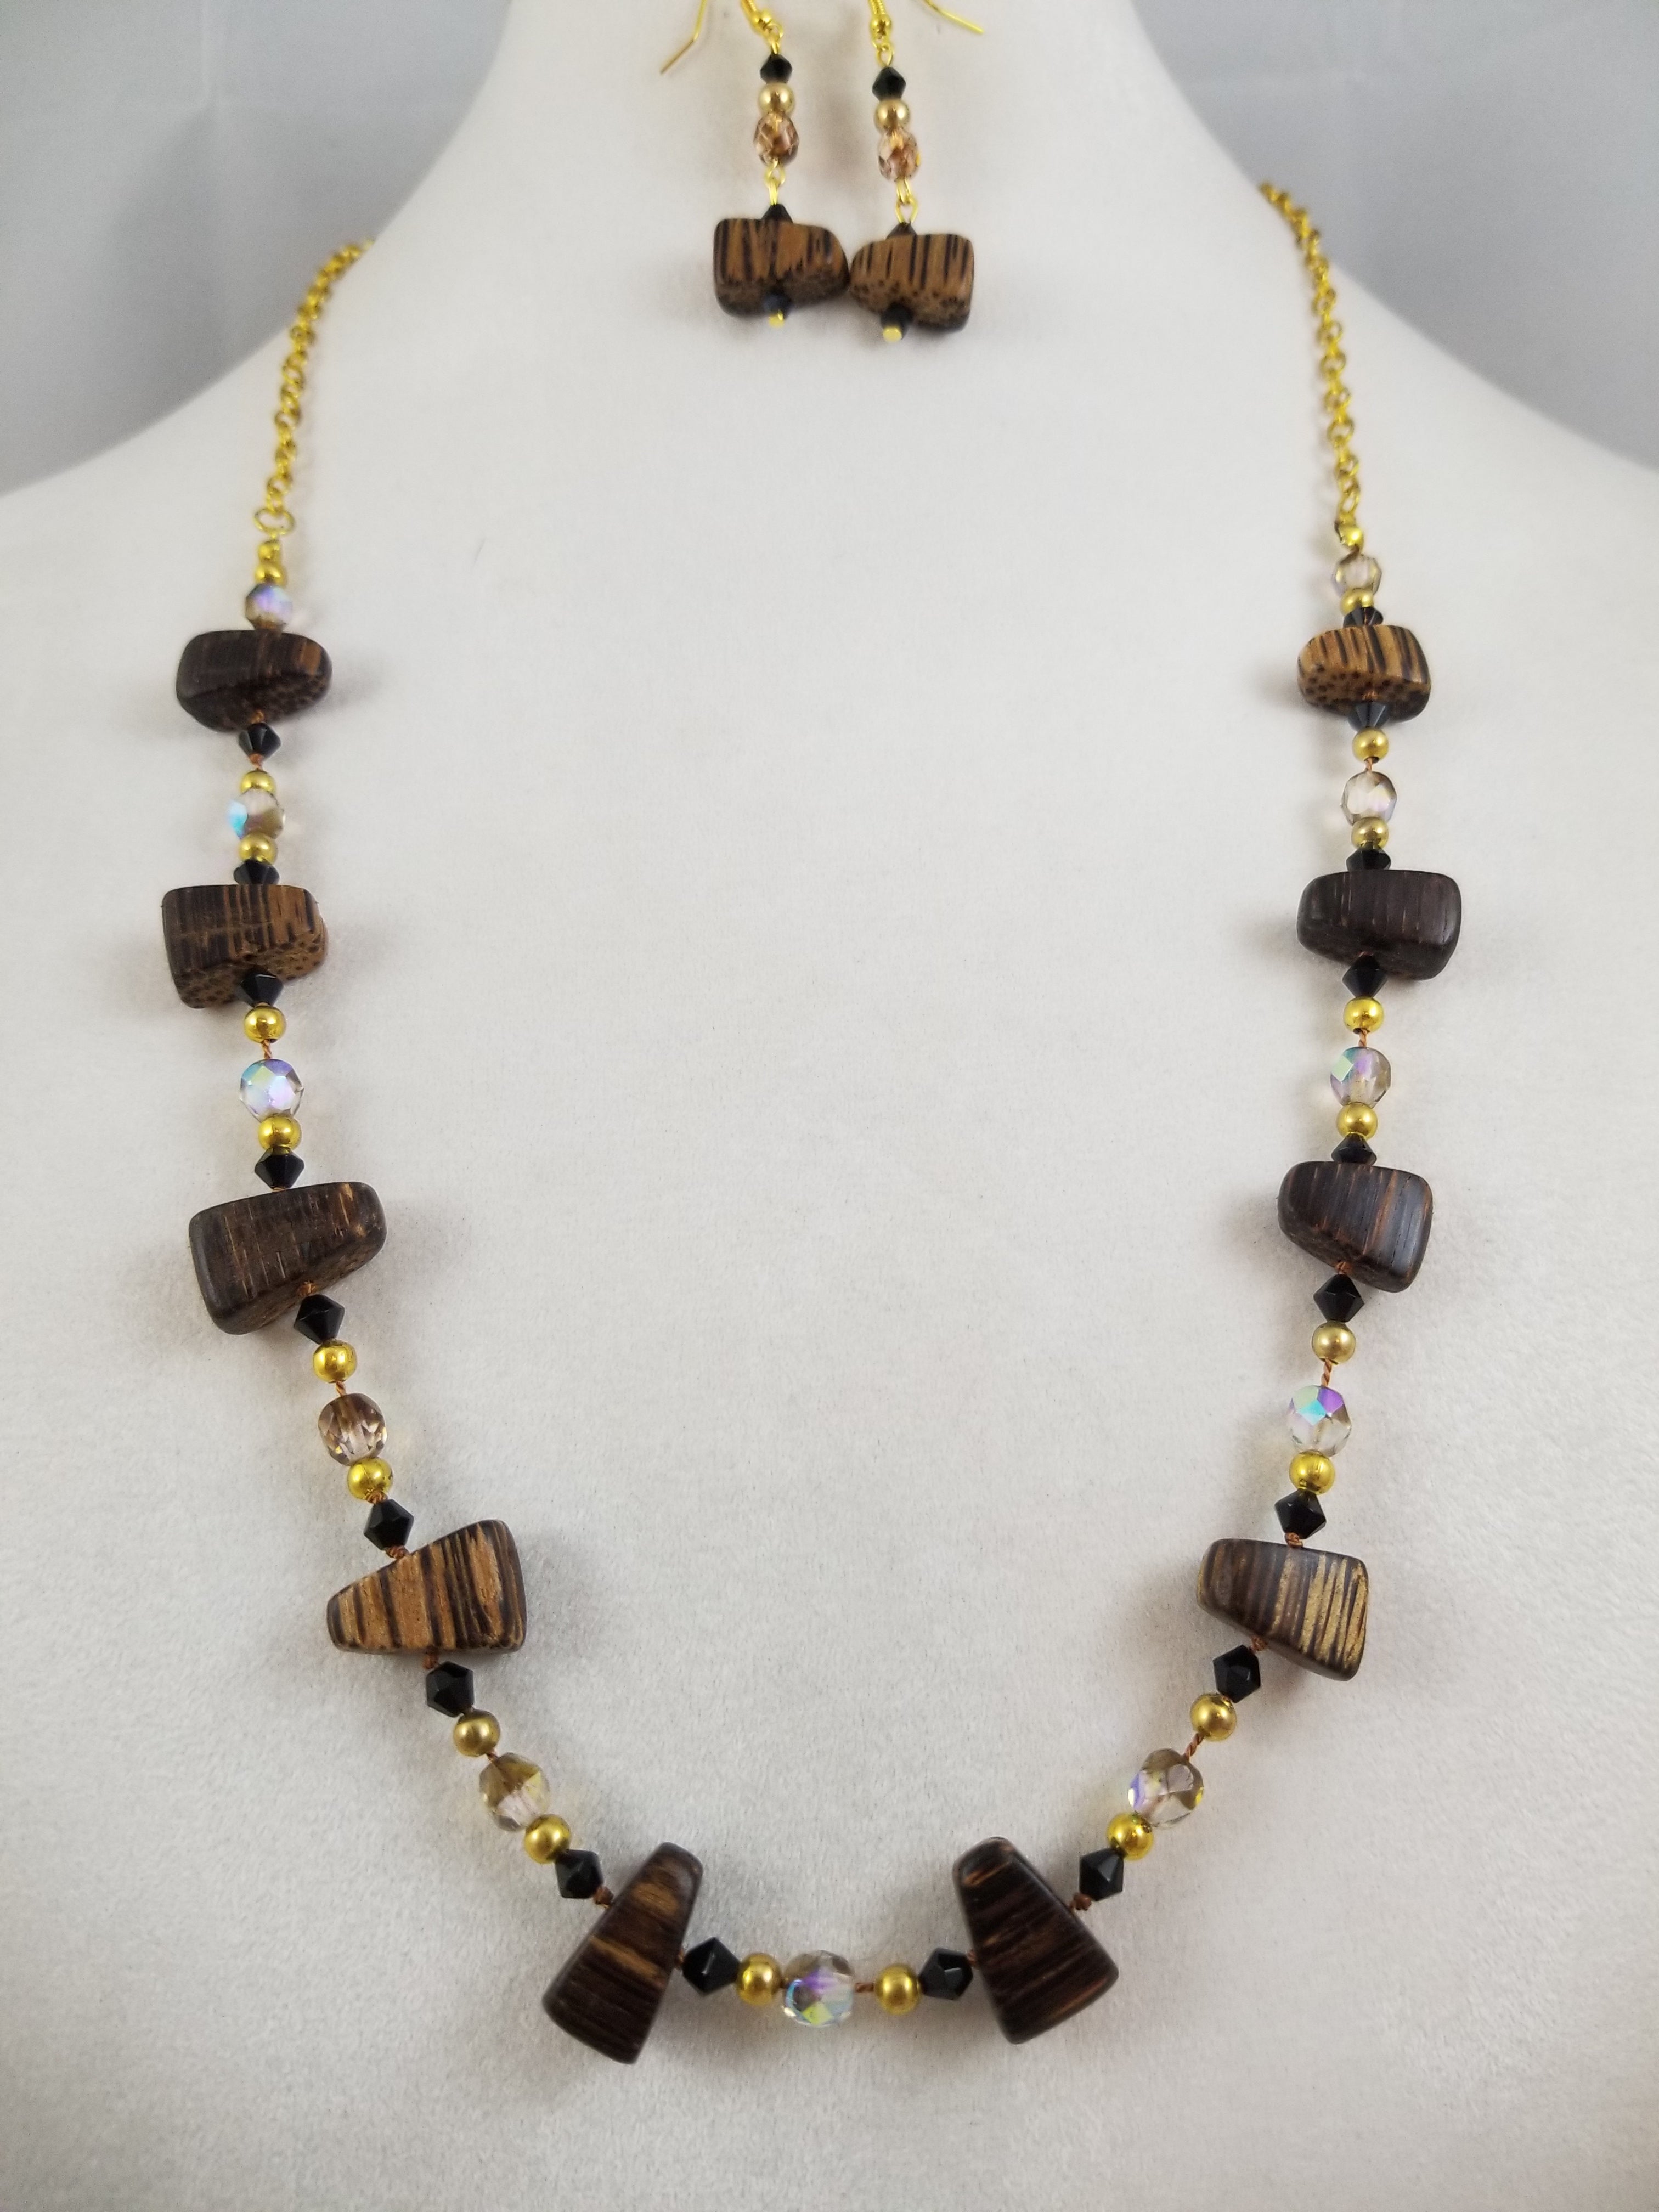 Zebra Wood Necklace with Earrings